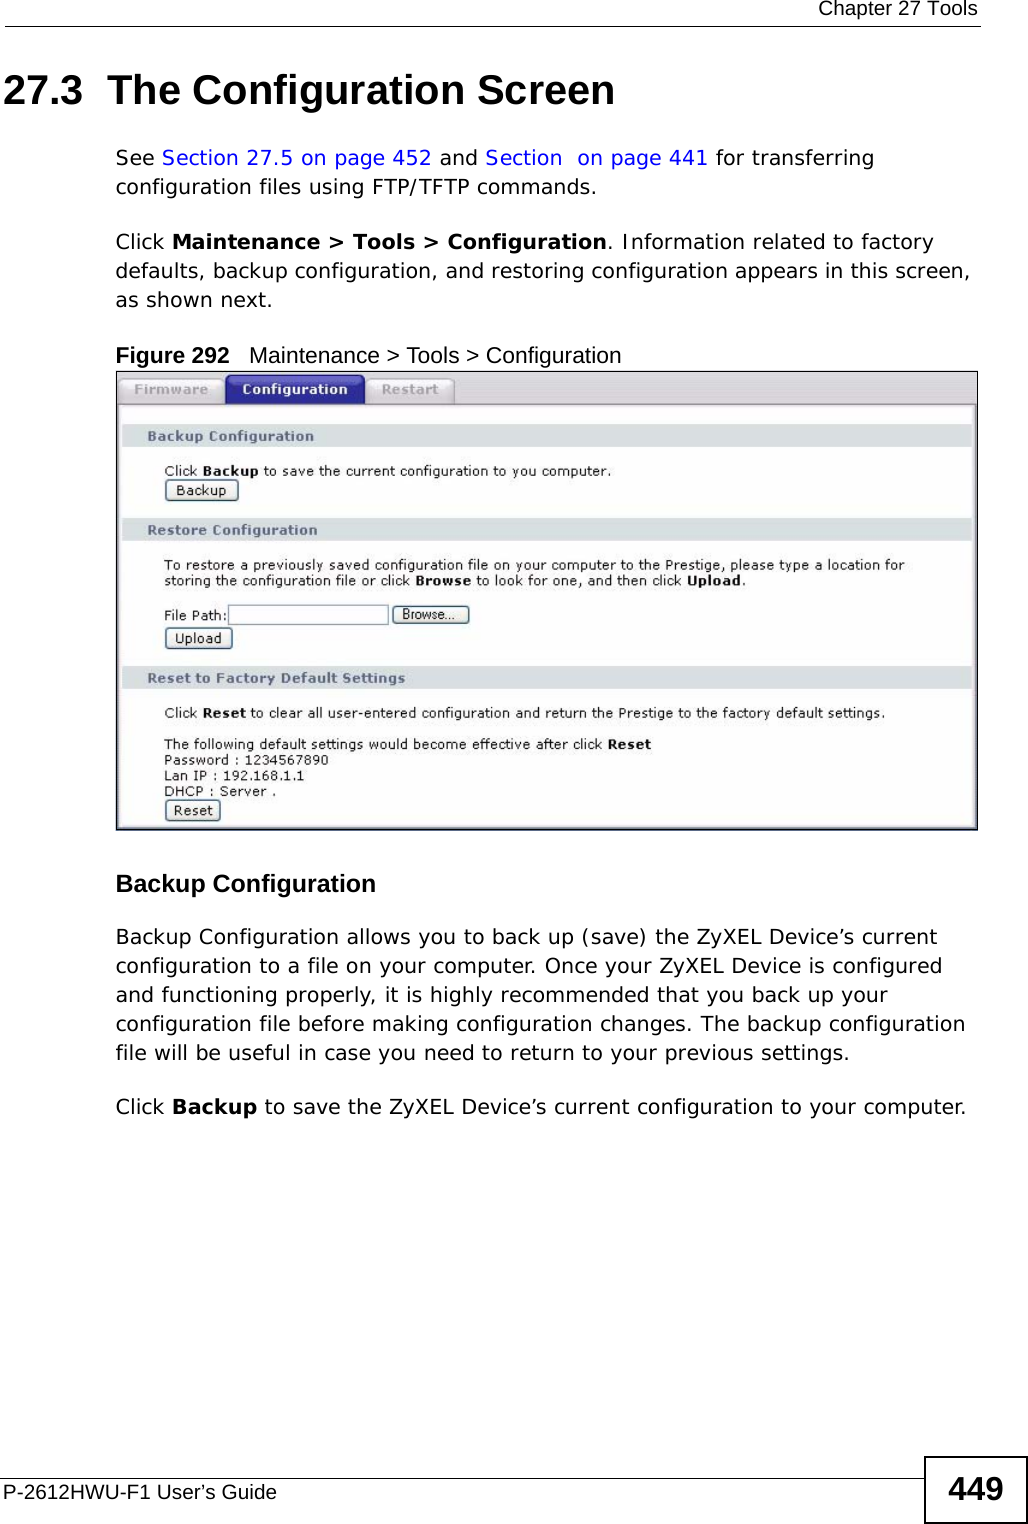  Chapter 27 ToolsP-2612HWU-F1 User’s Guide 44927.3  The Configuration Screen See Section 27.5 on page 452 and Section  on page 441 for transferring configuration files using FTP/TFTP commands.Click Maintenance &gt; Tools &gt; Configuration. Information related to factory defaults, backup configuration, and restoring configuration appears in this screen, as shown next.Figure 292   Maintenance &gt; Tools &gt; ConfigurationBackup Configuration Backup Configuration allows you to back up (save) the ZyXEL Device’s current configuration to a file on your computer. Once your ZyXEL Device is configured and functioning properly, it is highly recommended that you back up your configuration file before making configuration changes. The backup configuration file will be useful in case you need to return to your previous settings. Click Backup to save the ZyXEL Device’s current configuration to your computer.